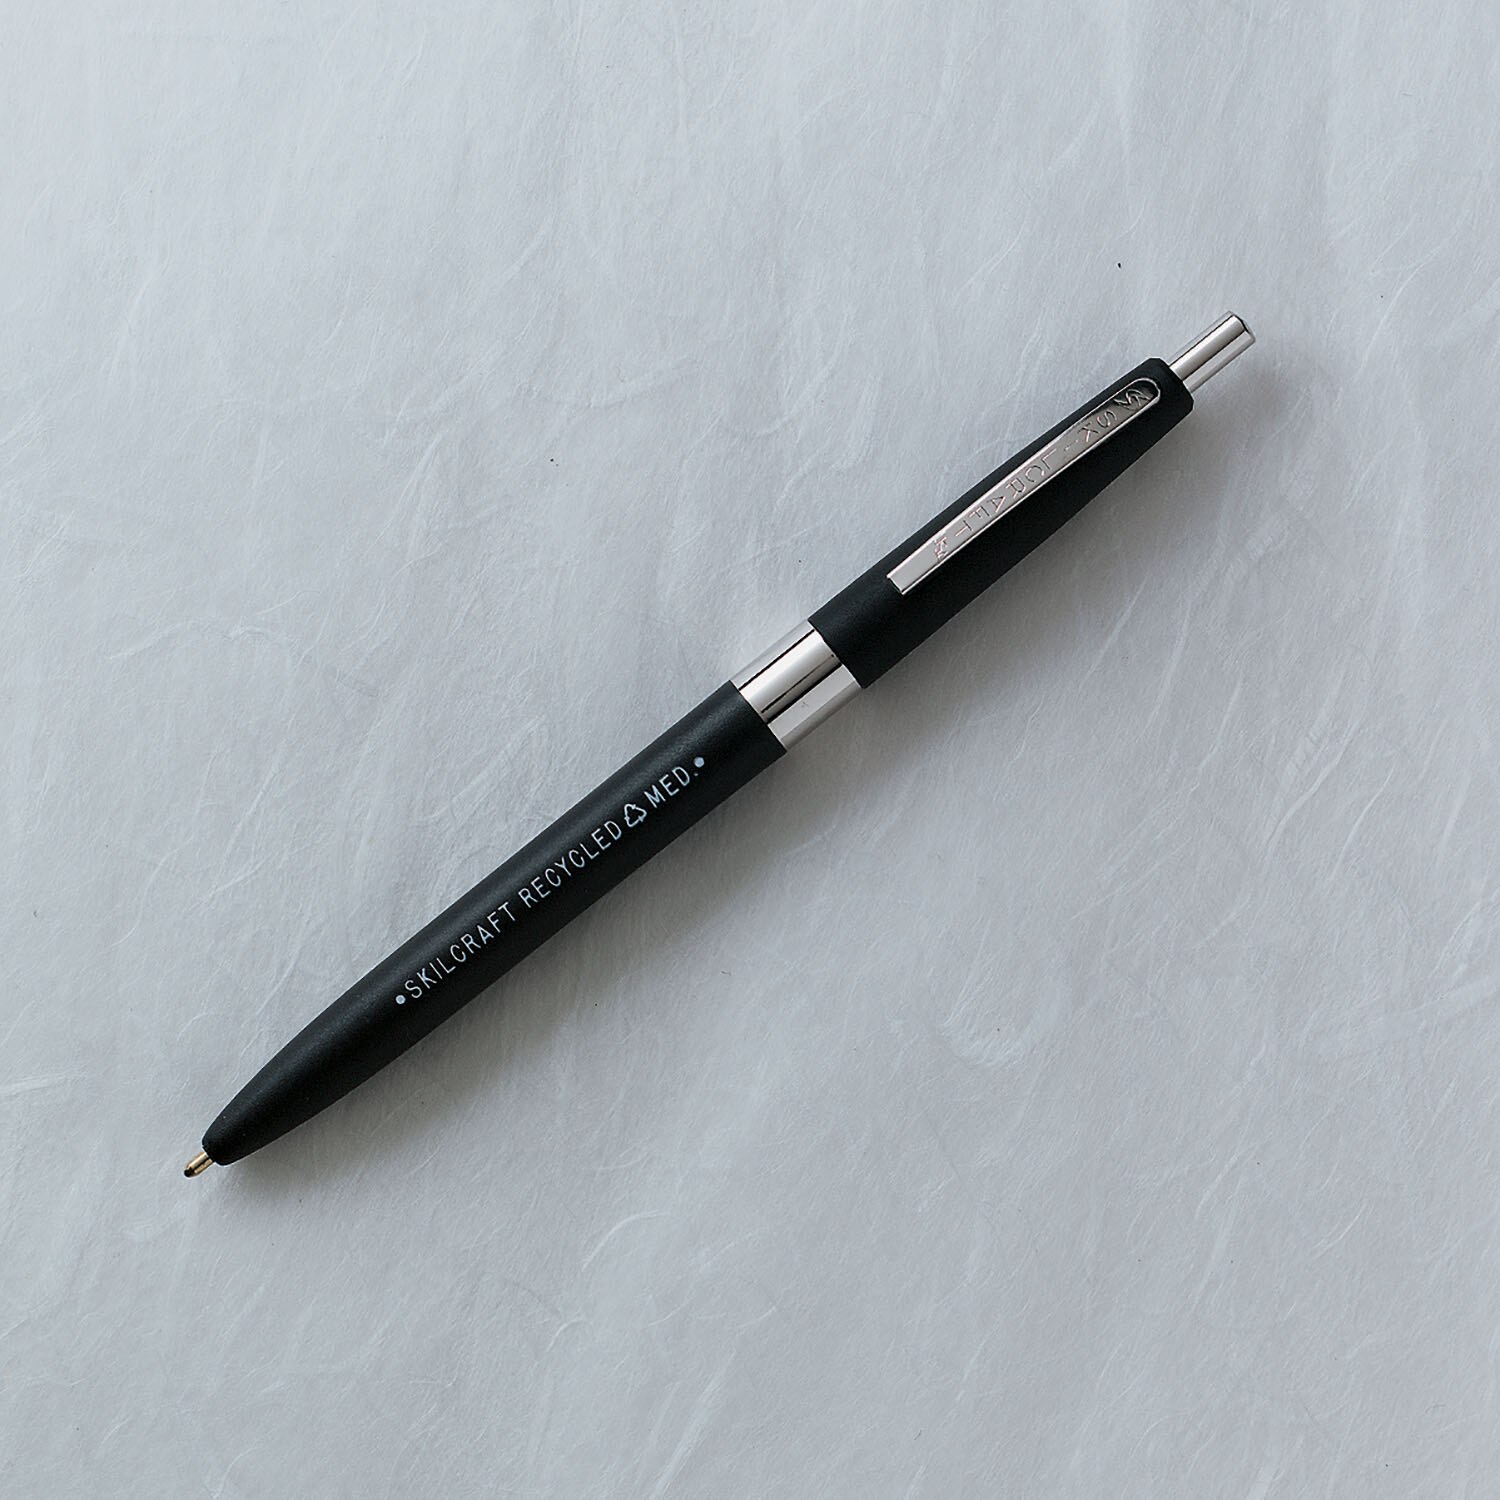 Pen, Ballpoint, Retractable, Recycled,  "RECYCLED", Black, Medium Point